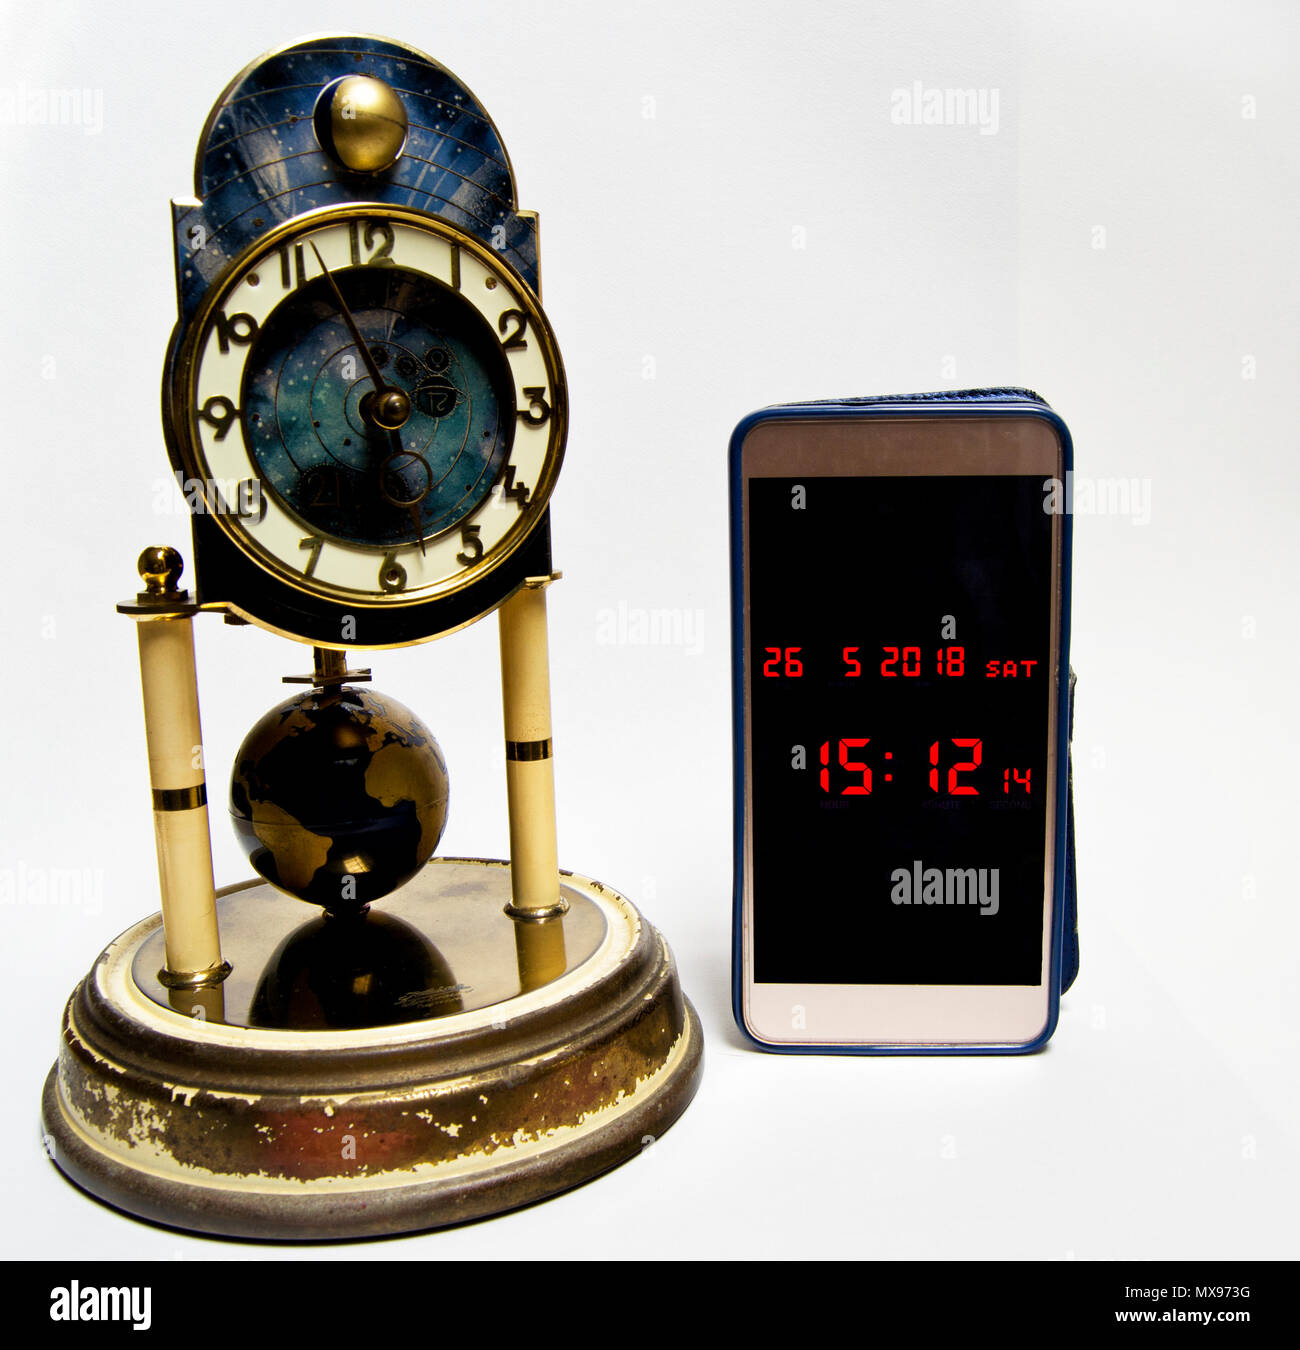 evolution of time measurement from historical clock to modern smartphone. Stock Photo